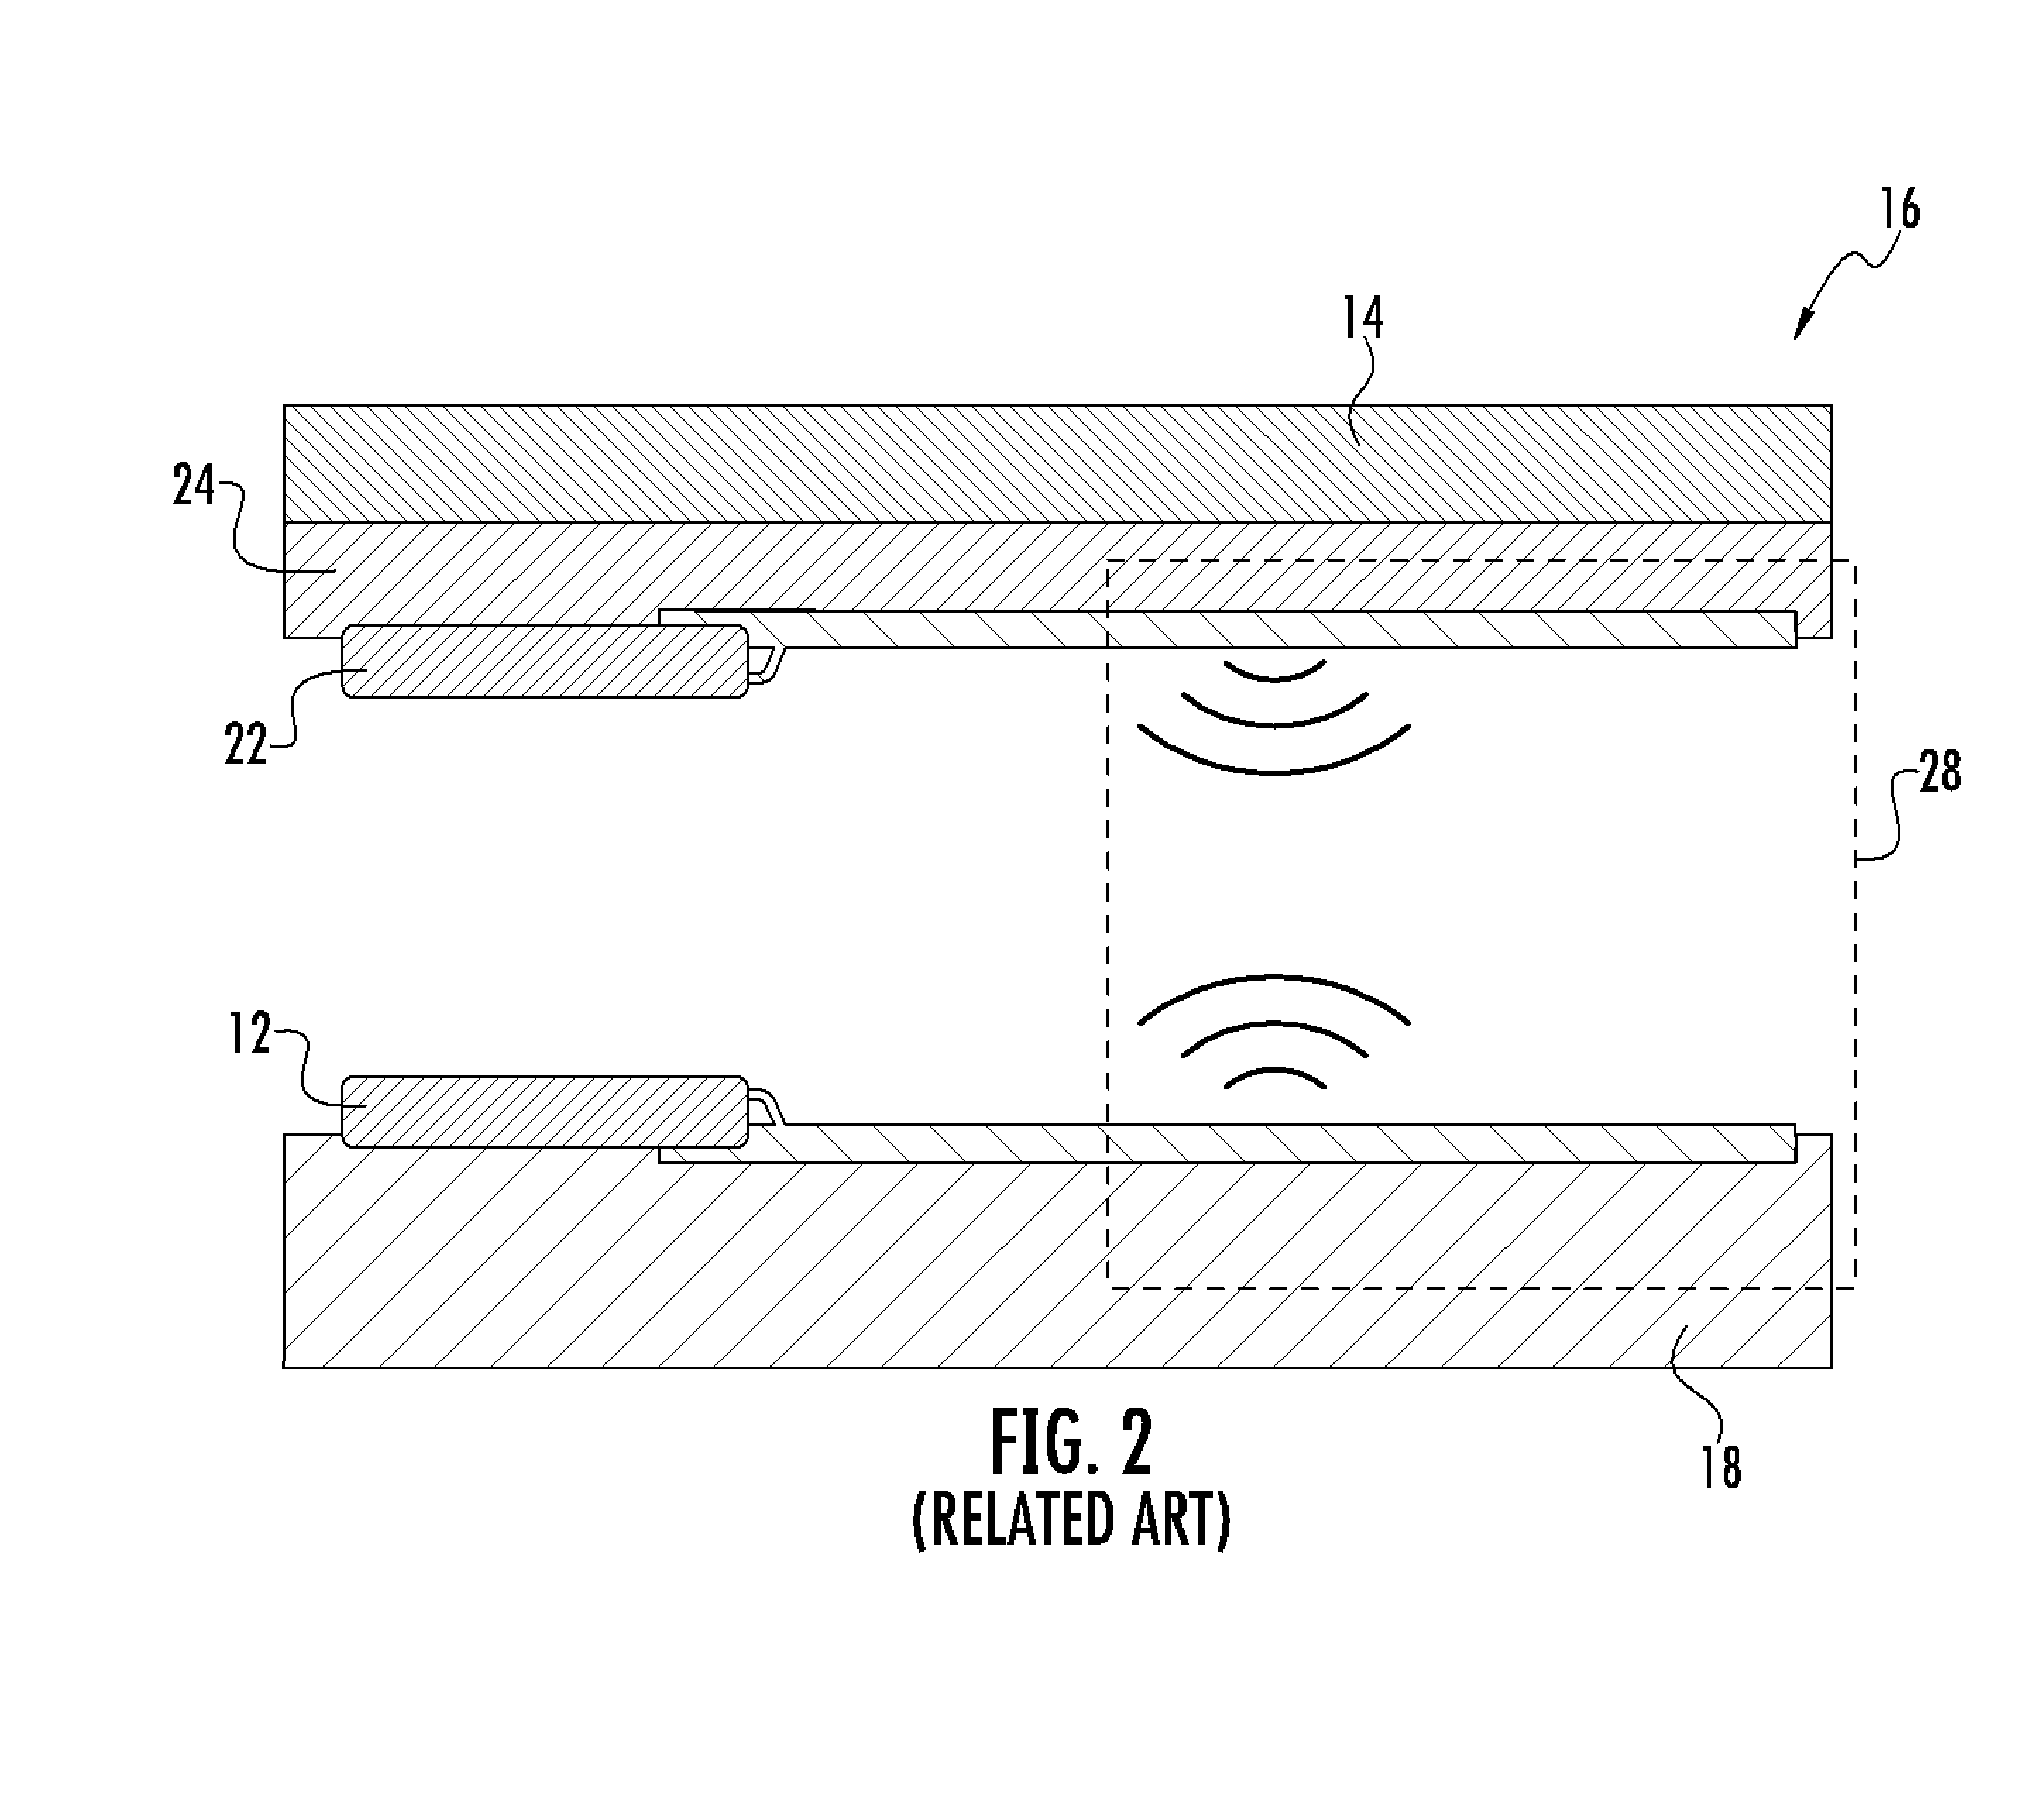 Contactless data communication using in-plane magnetic fields, and related systems and methods